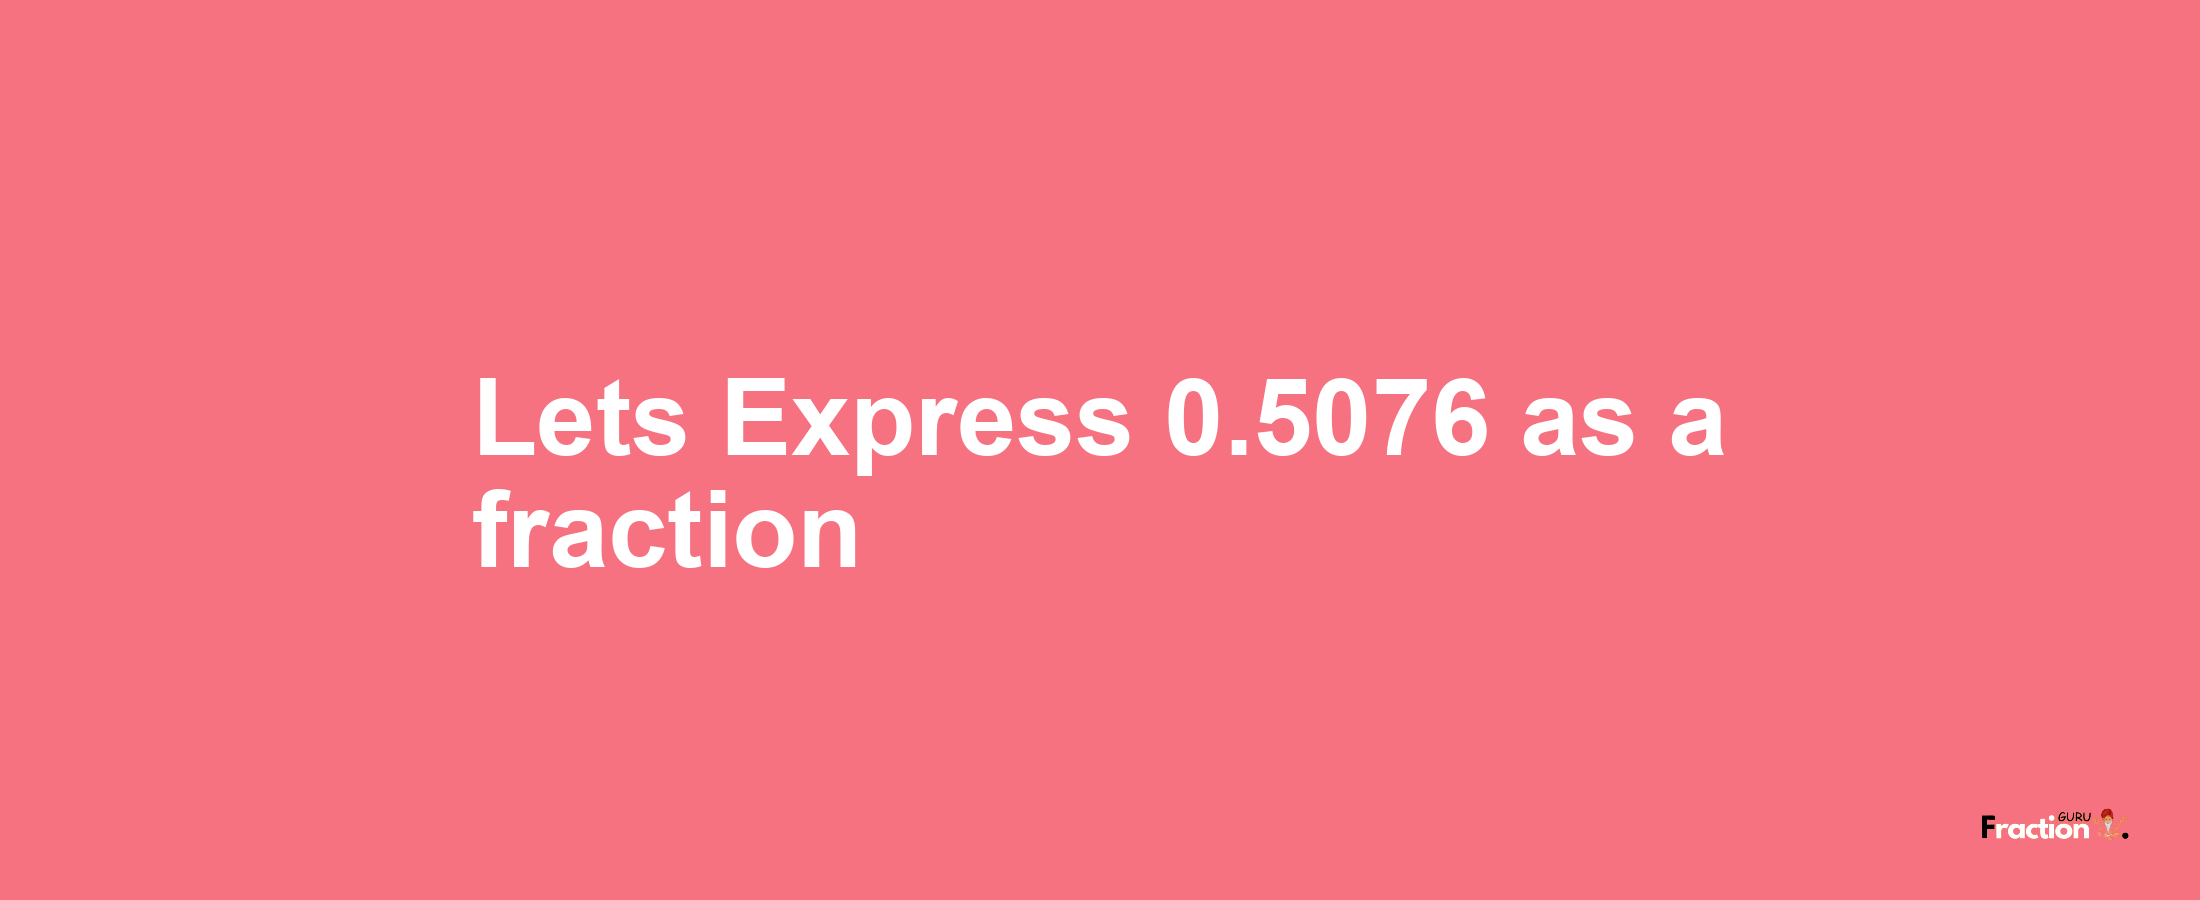 Lets Express 0.5076 as afraction